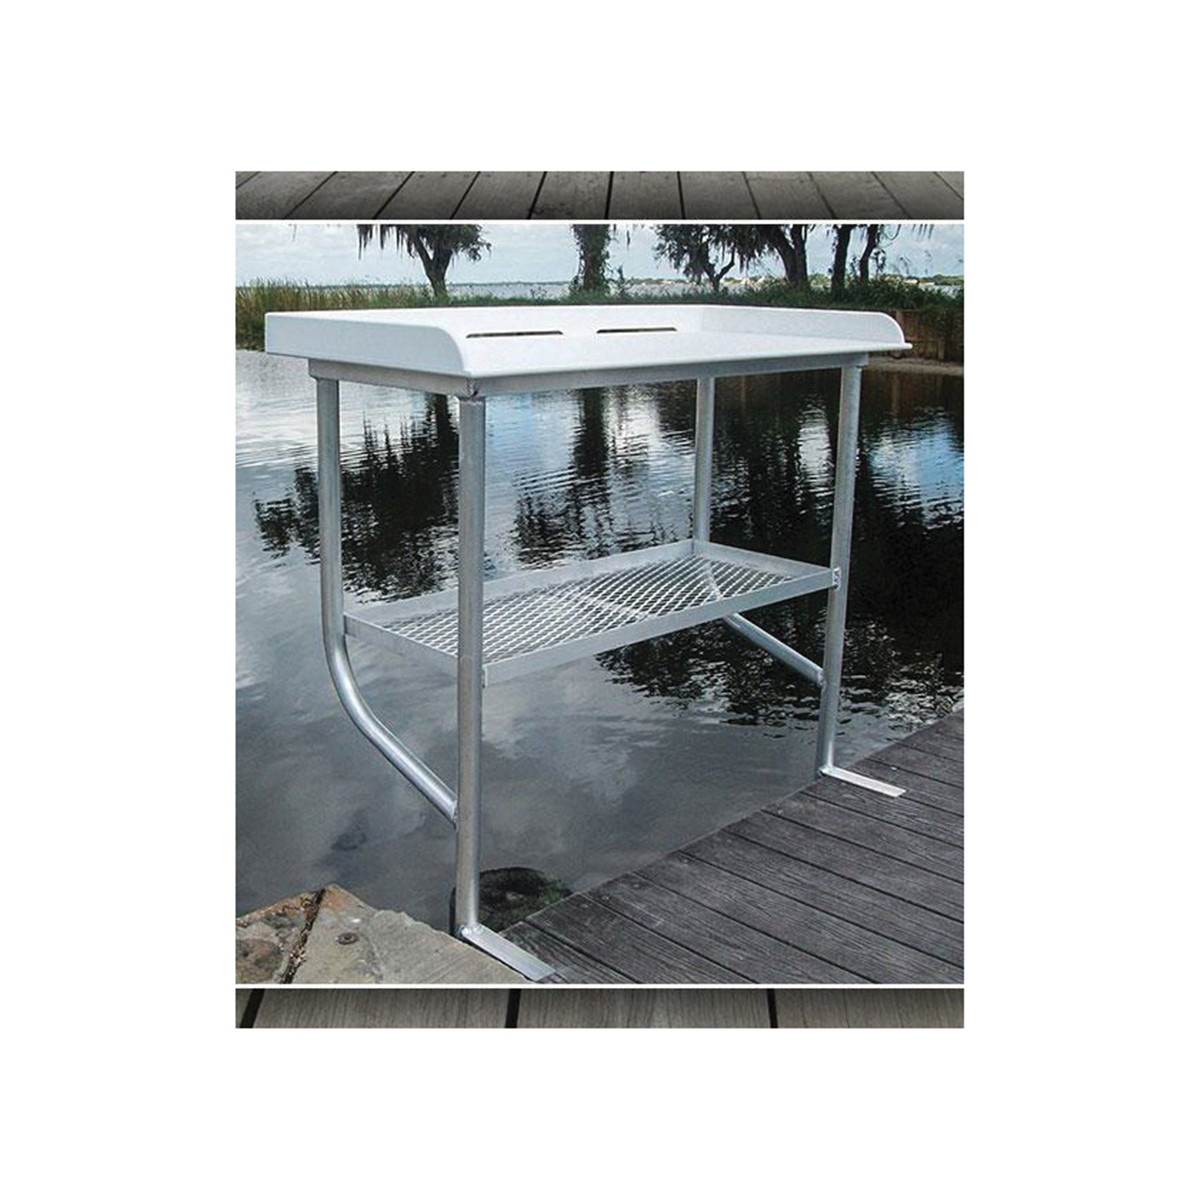 FISH4L3818 4-Legged Fish Cleaning Table, 18 in OAL, 38 in OAW, Aluminum/Polyethylene